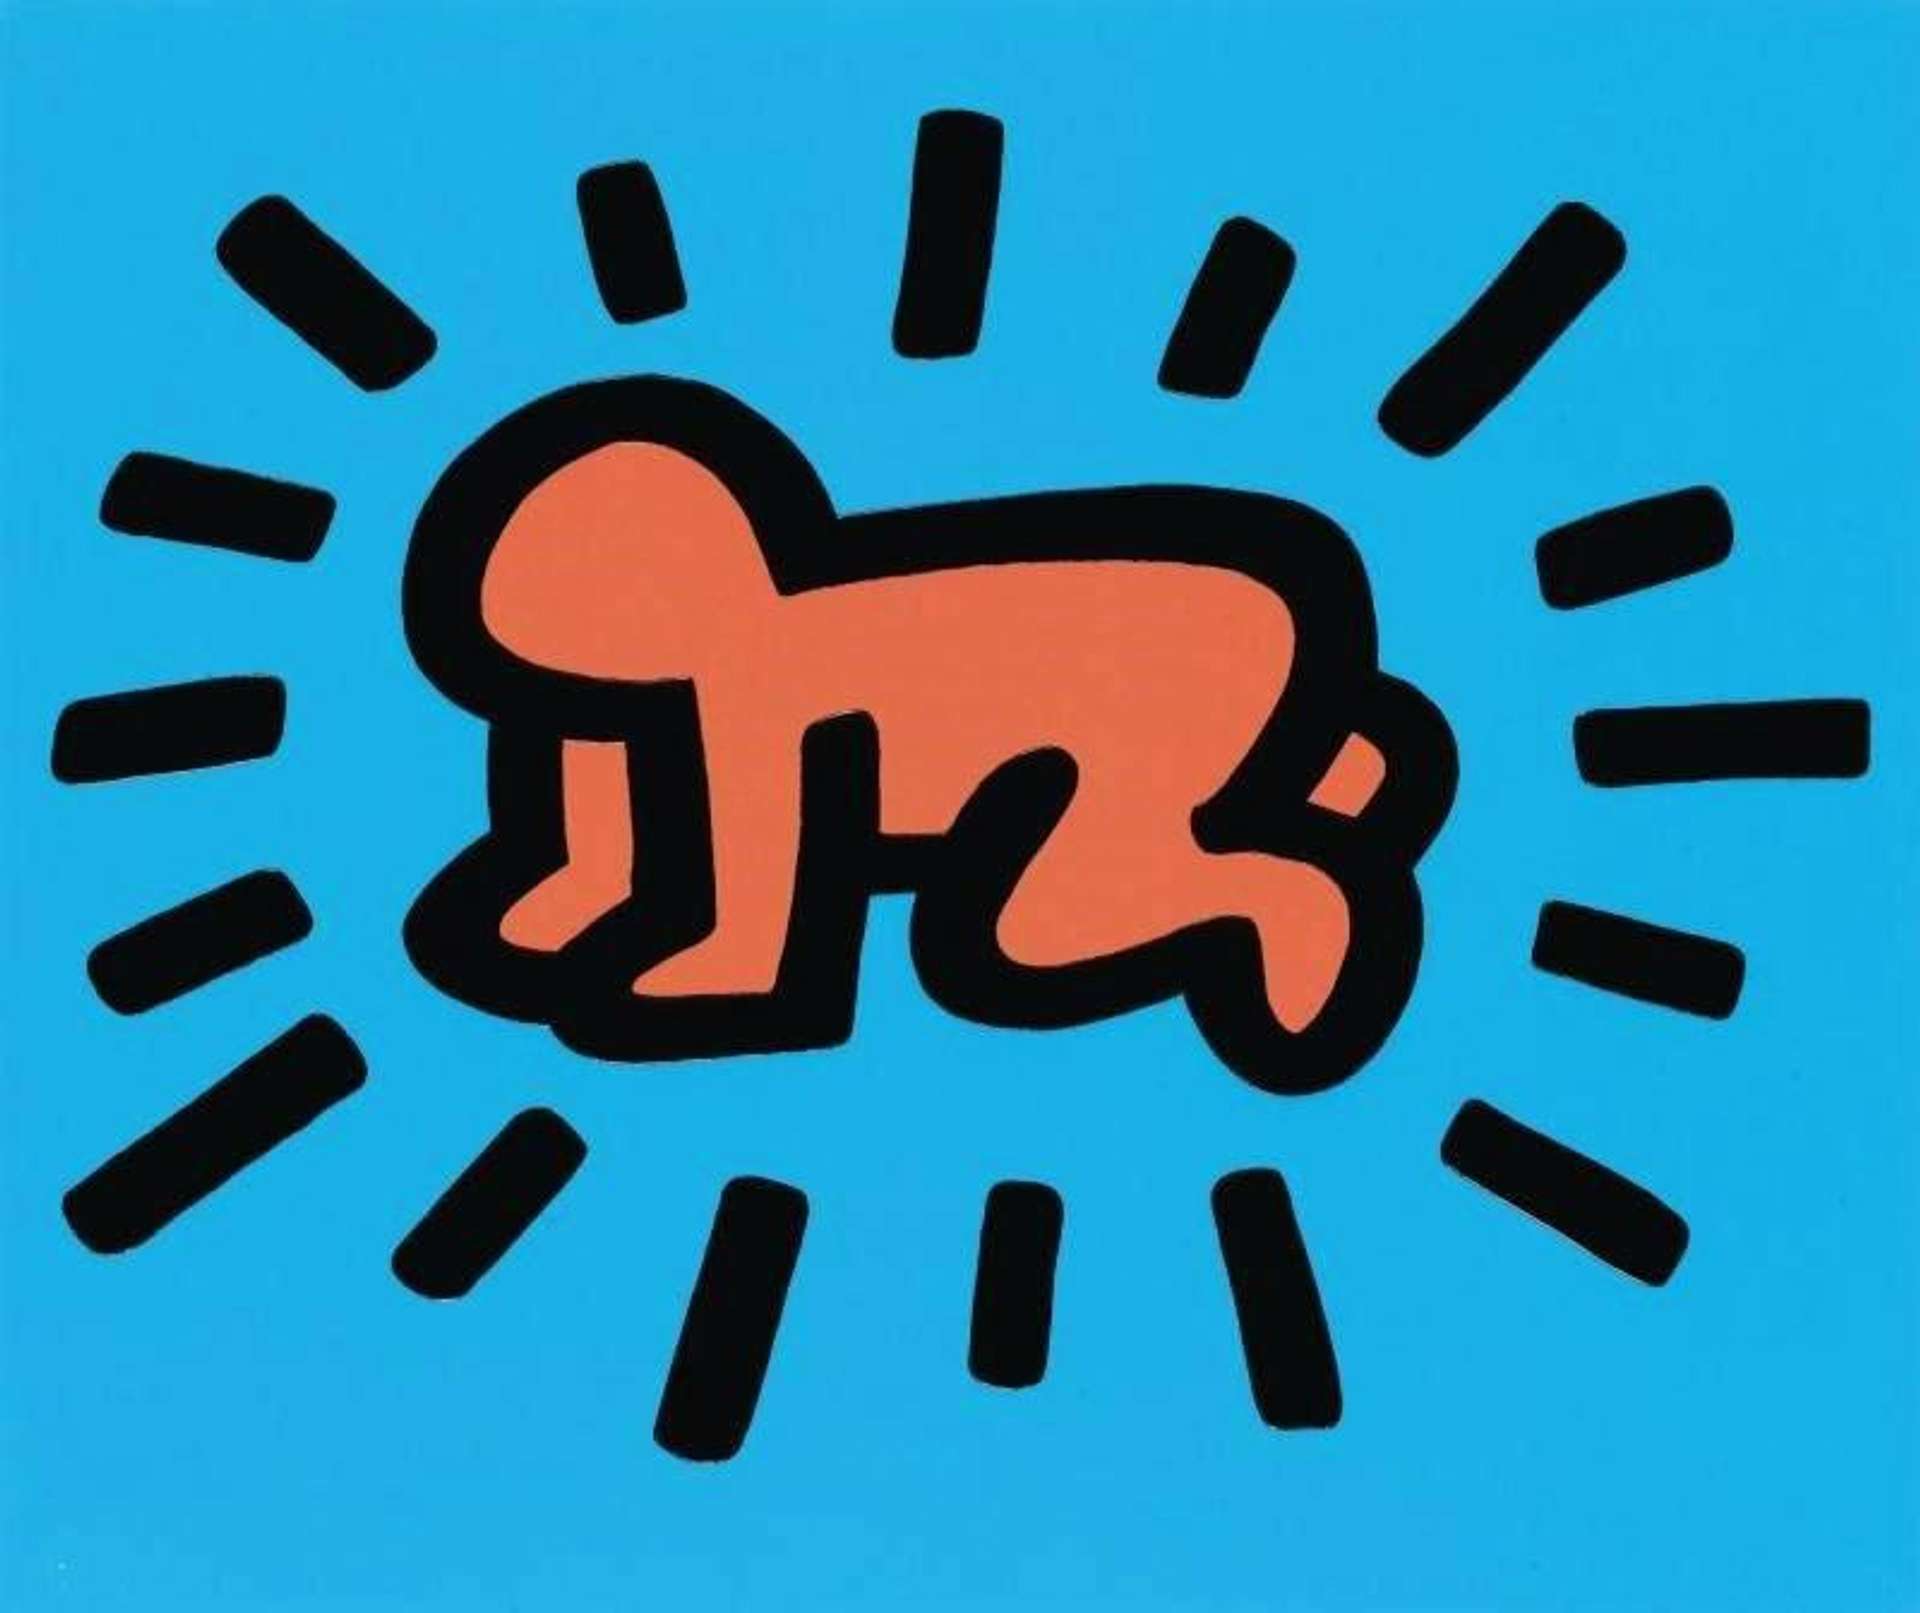 Keith Haring Radiant Baby (Signed Print) 1990